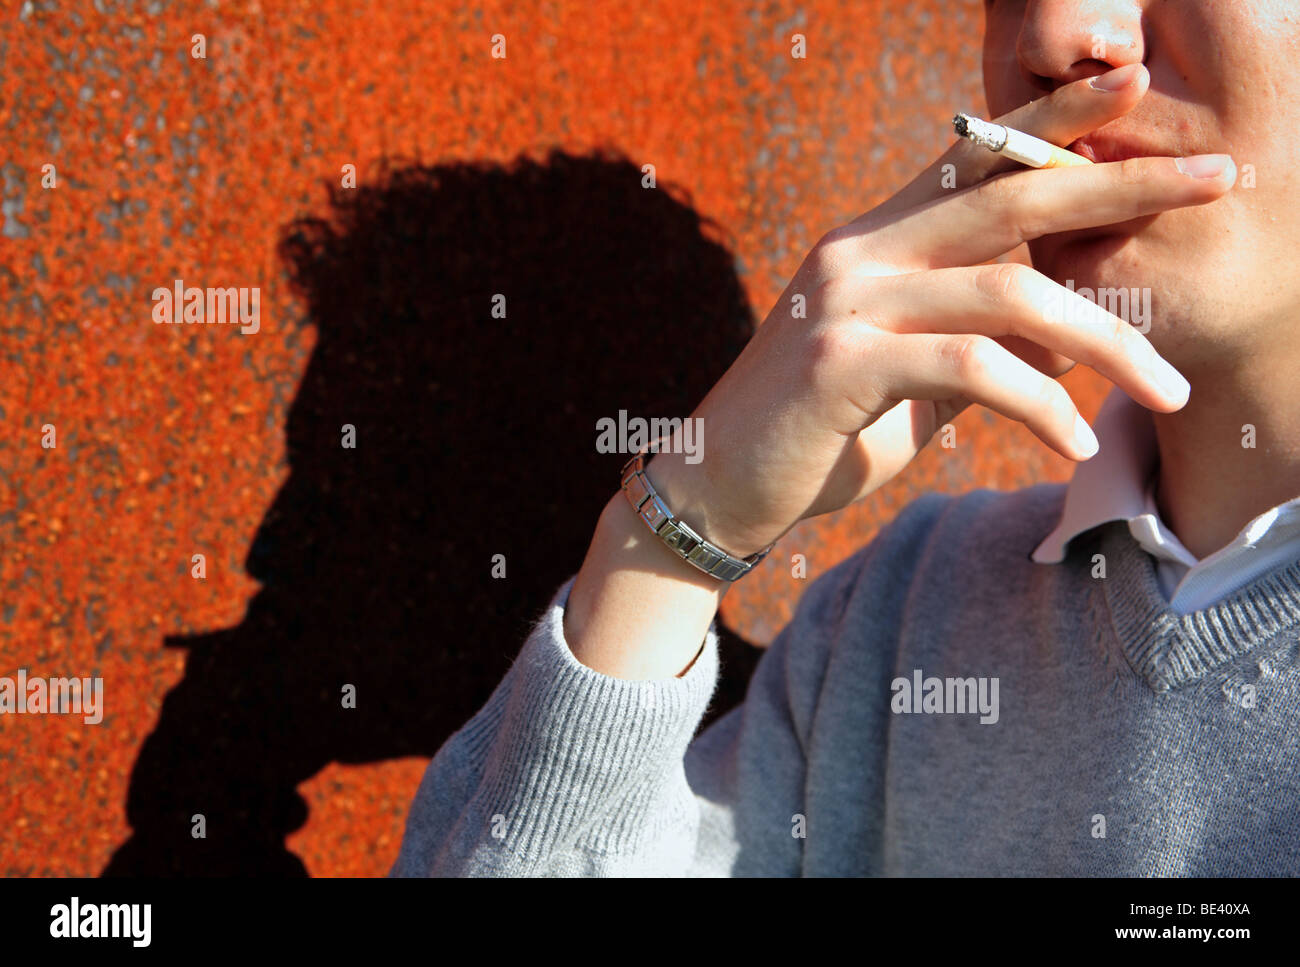 MAN WITH CIGARETTE. Stock Photo